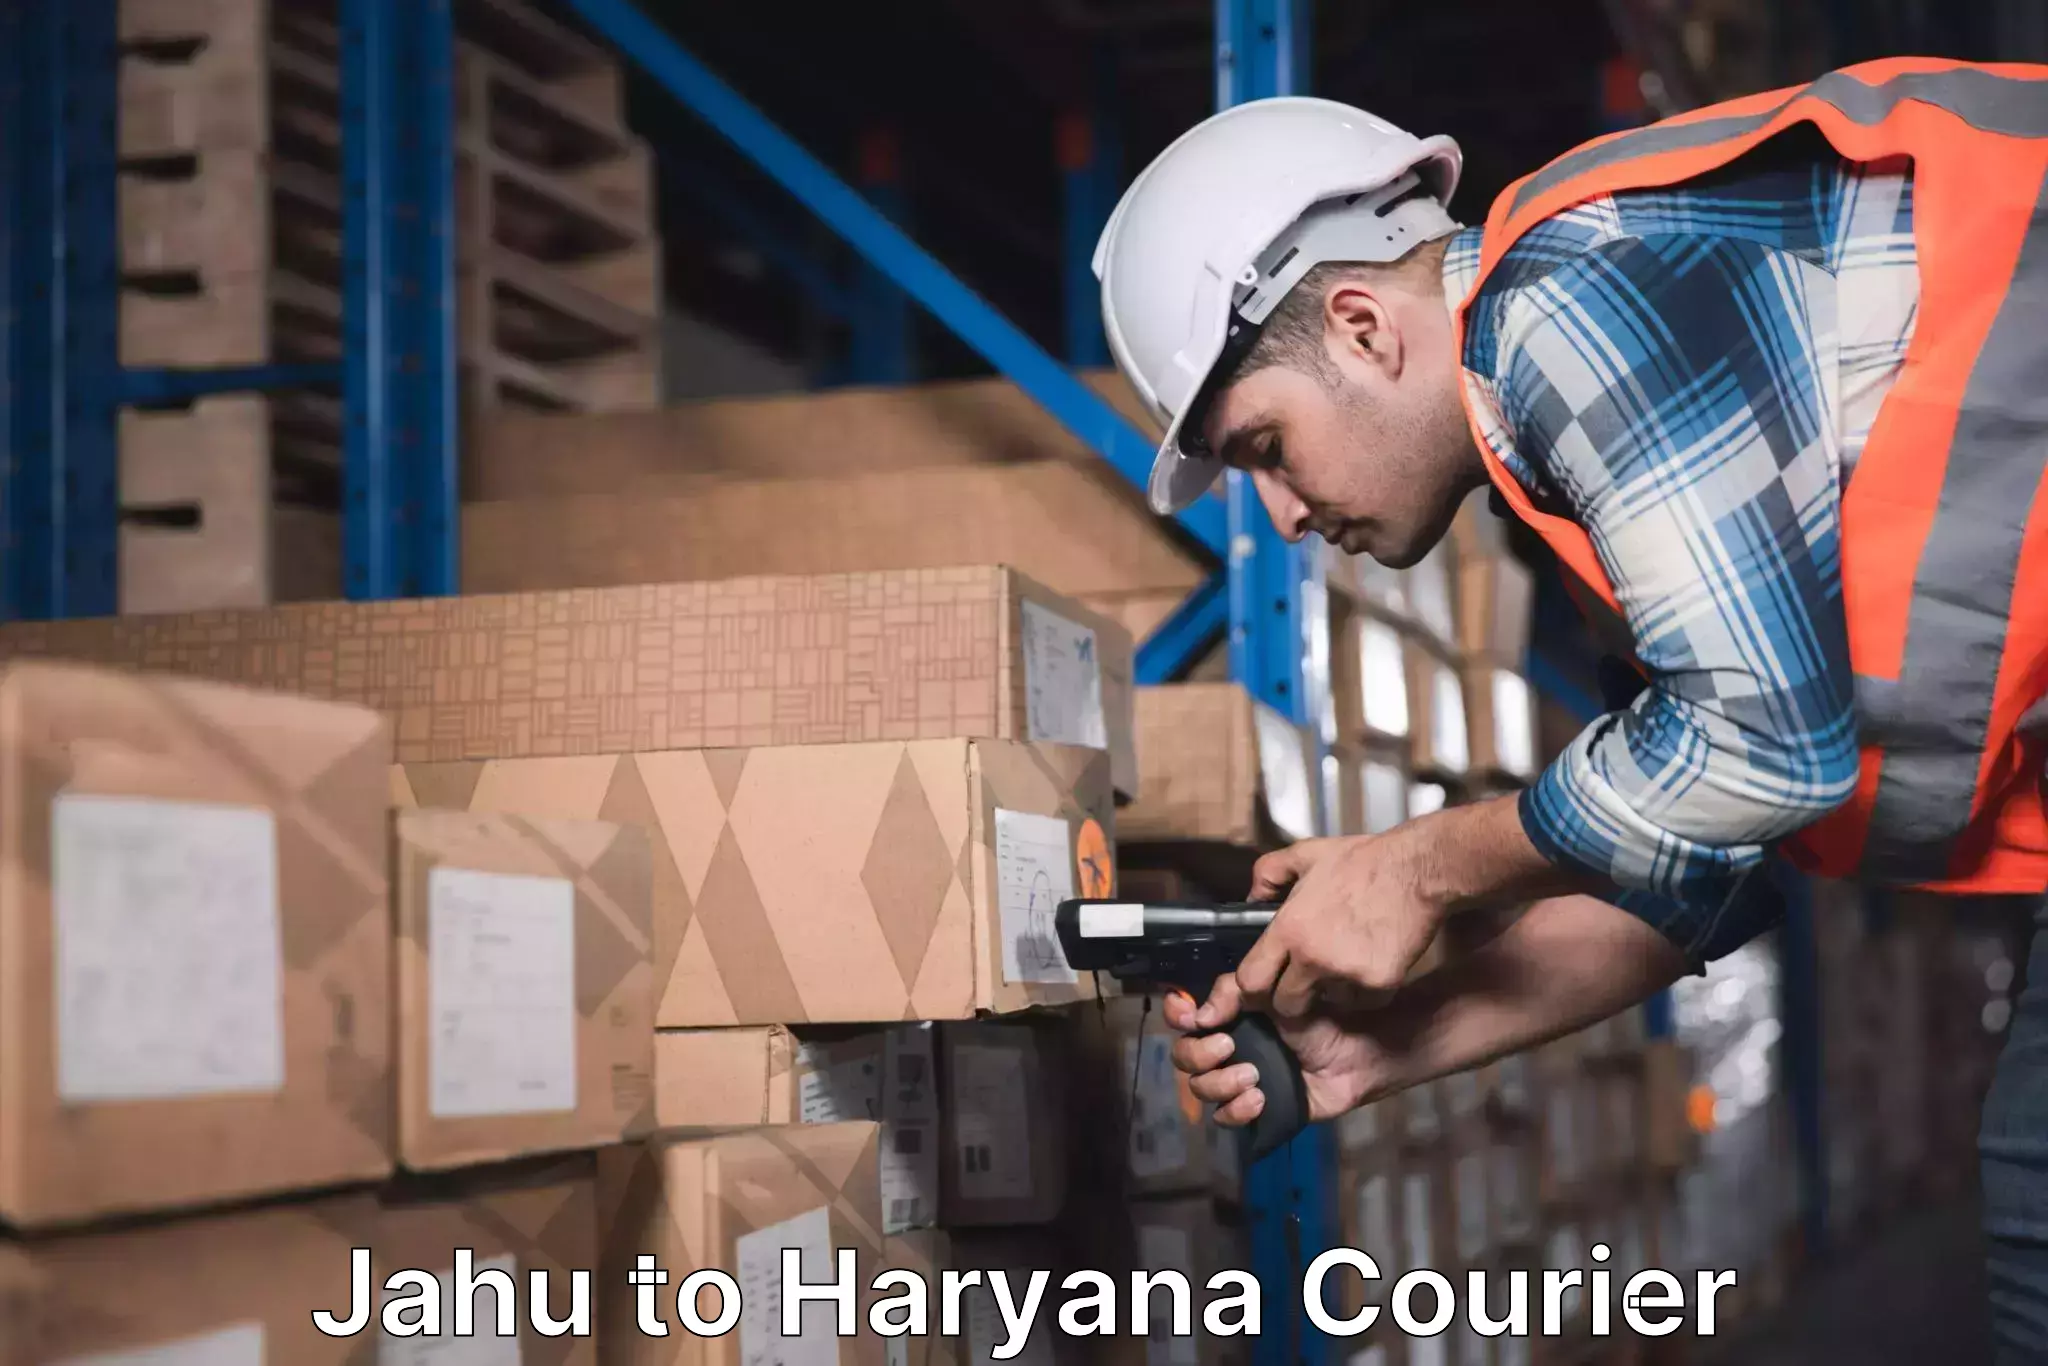 Global courier networks Jahu to Palwal